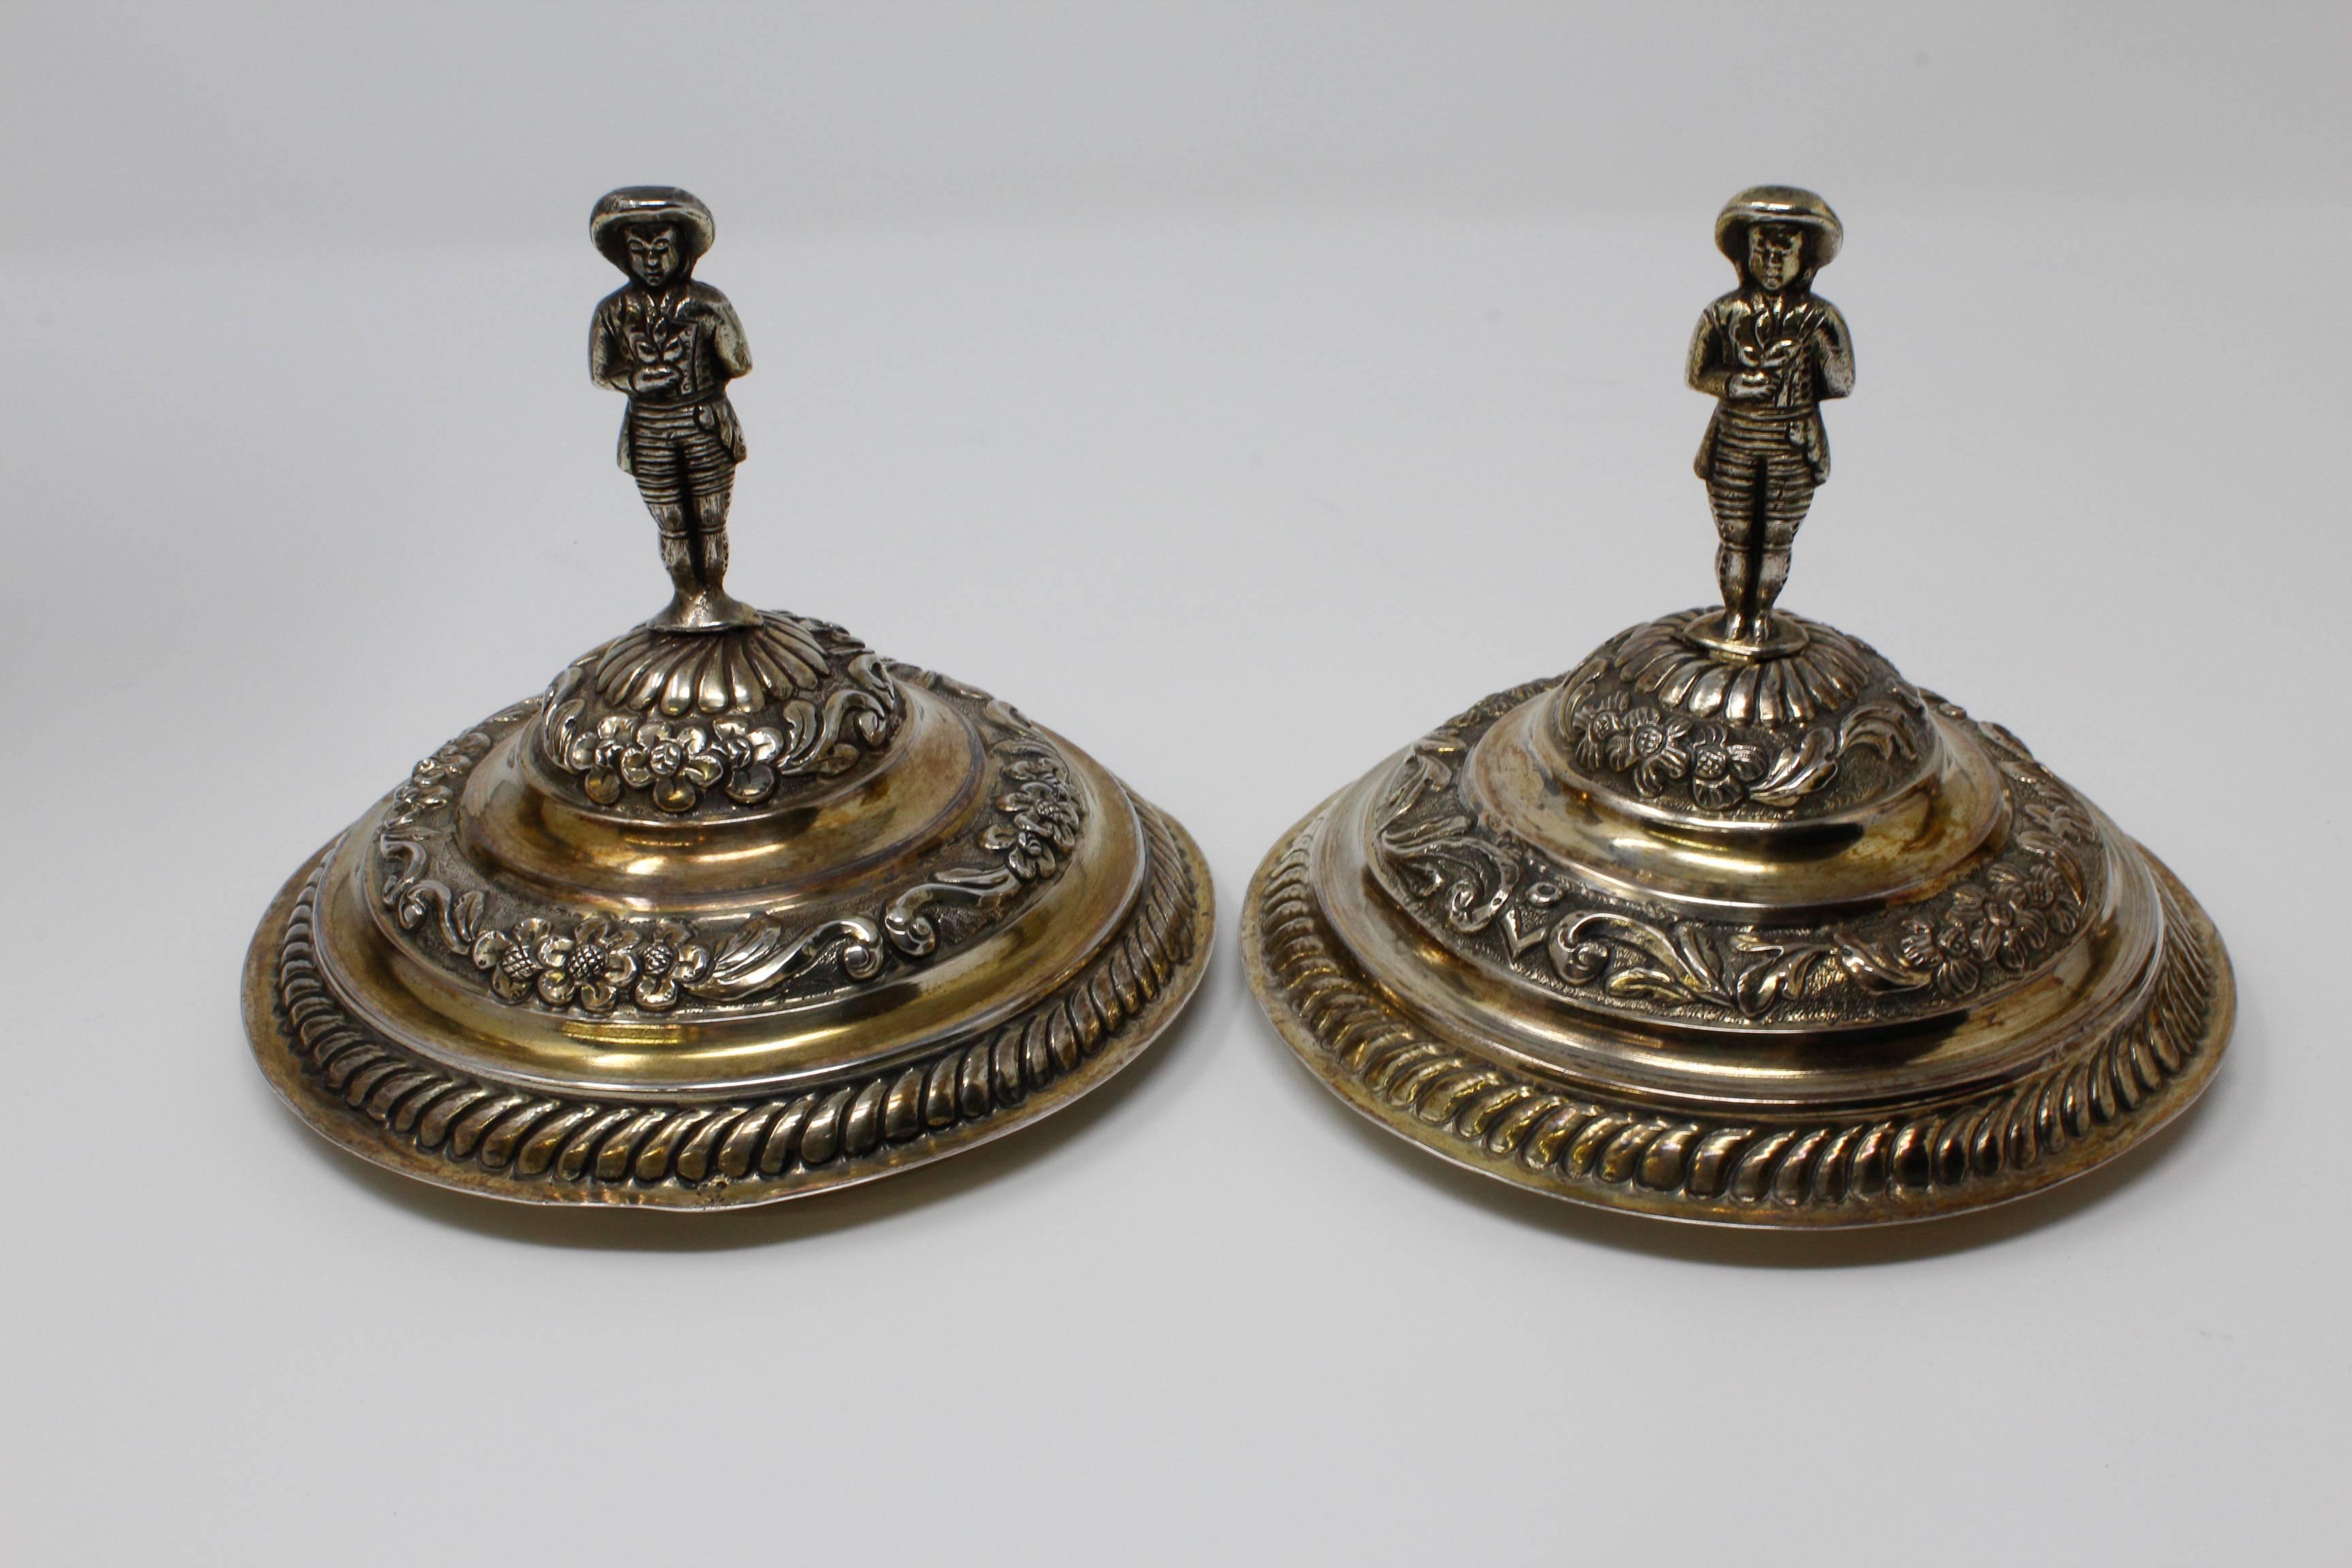 Covered Vases with Removable Lids, Gilt Silver, German in 17th Century Style For Sale 1